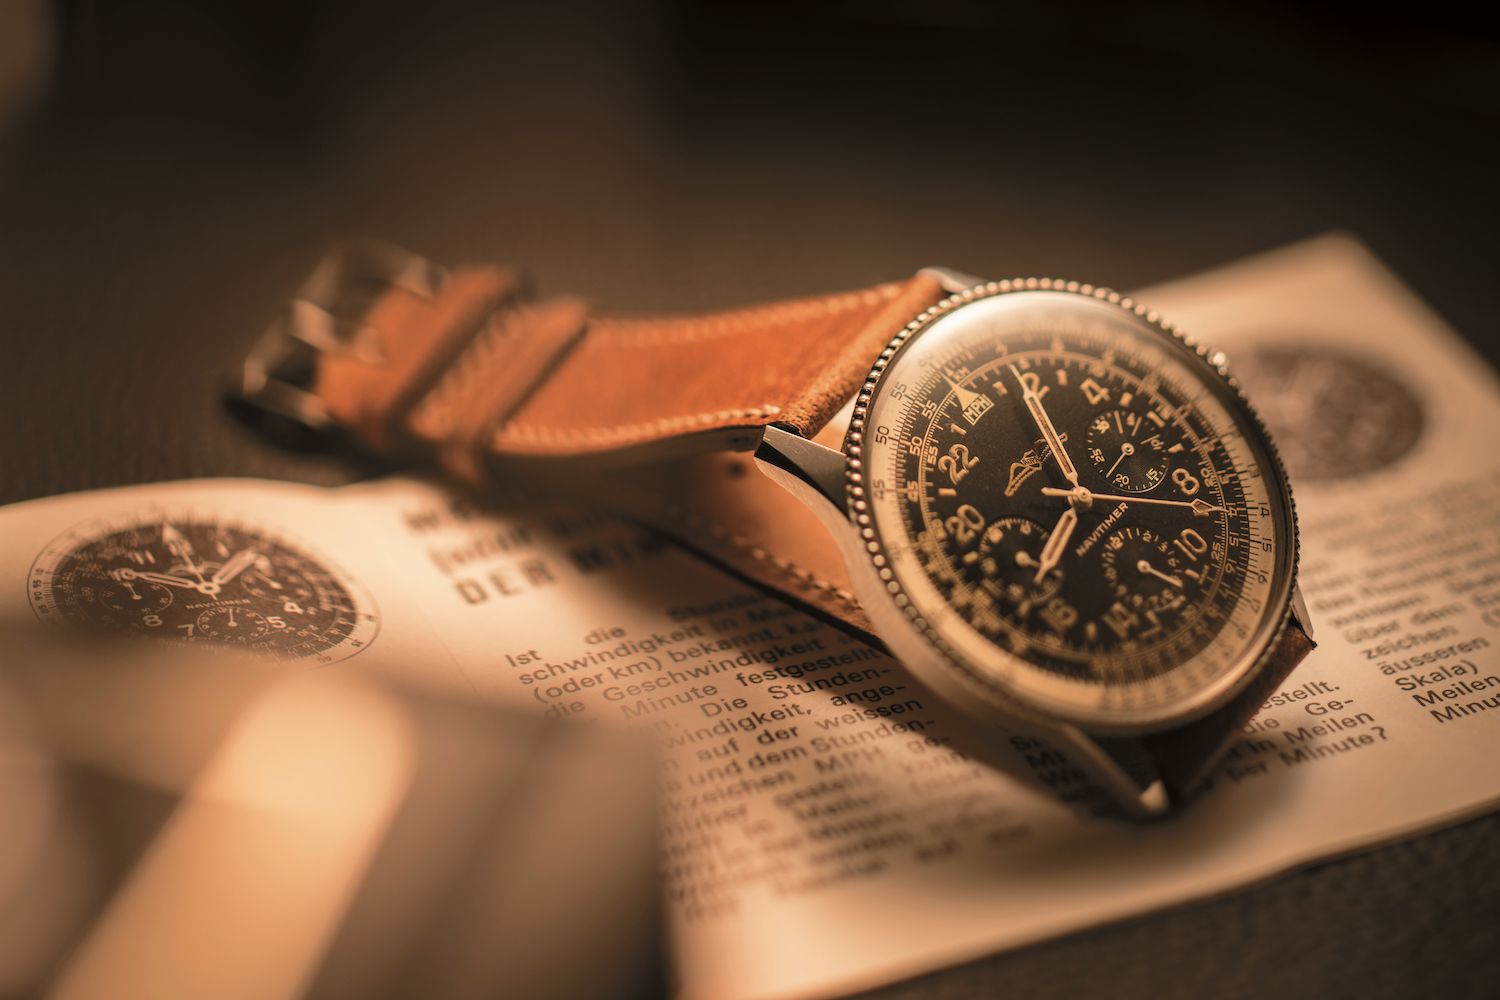 Breitling’s Navitimer For AOPA: 70 Years Of A Legendary Timepiece